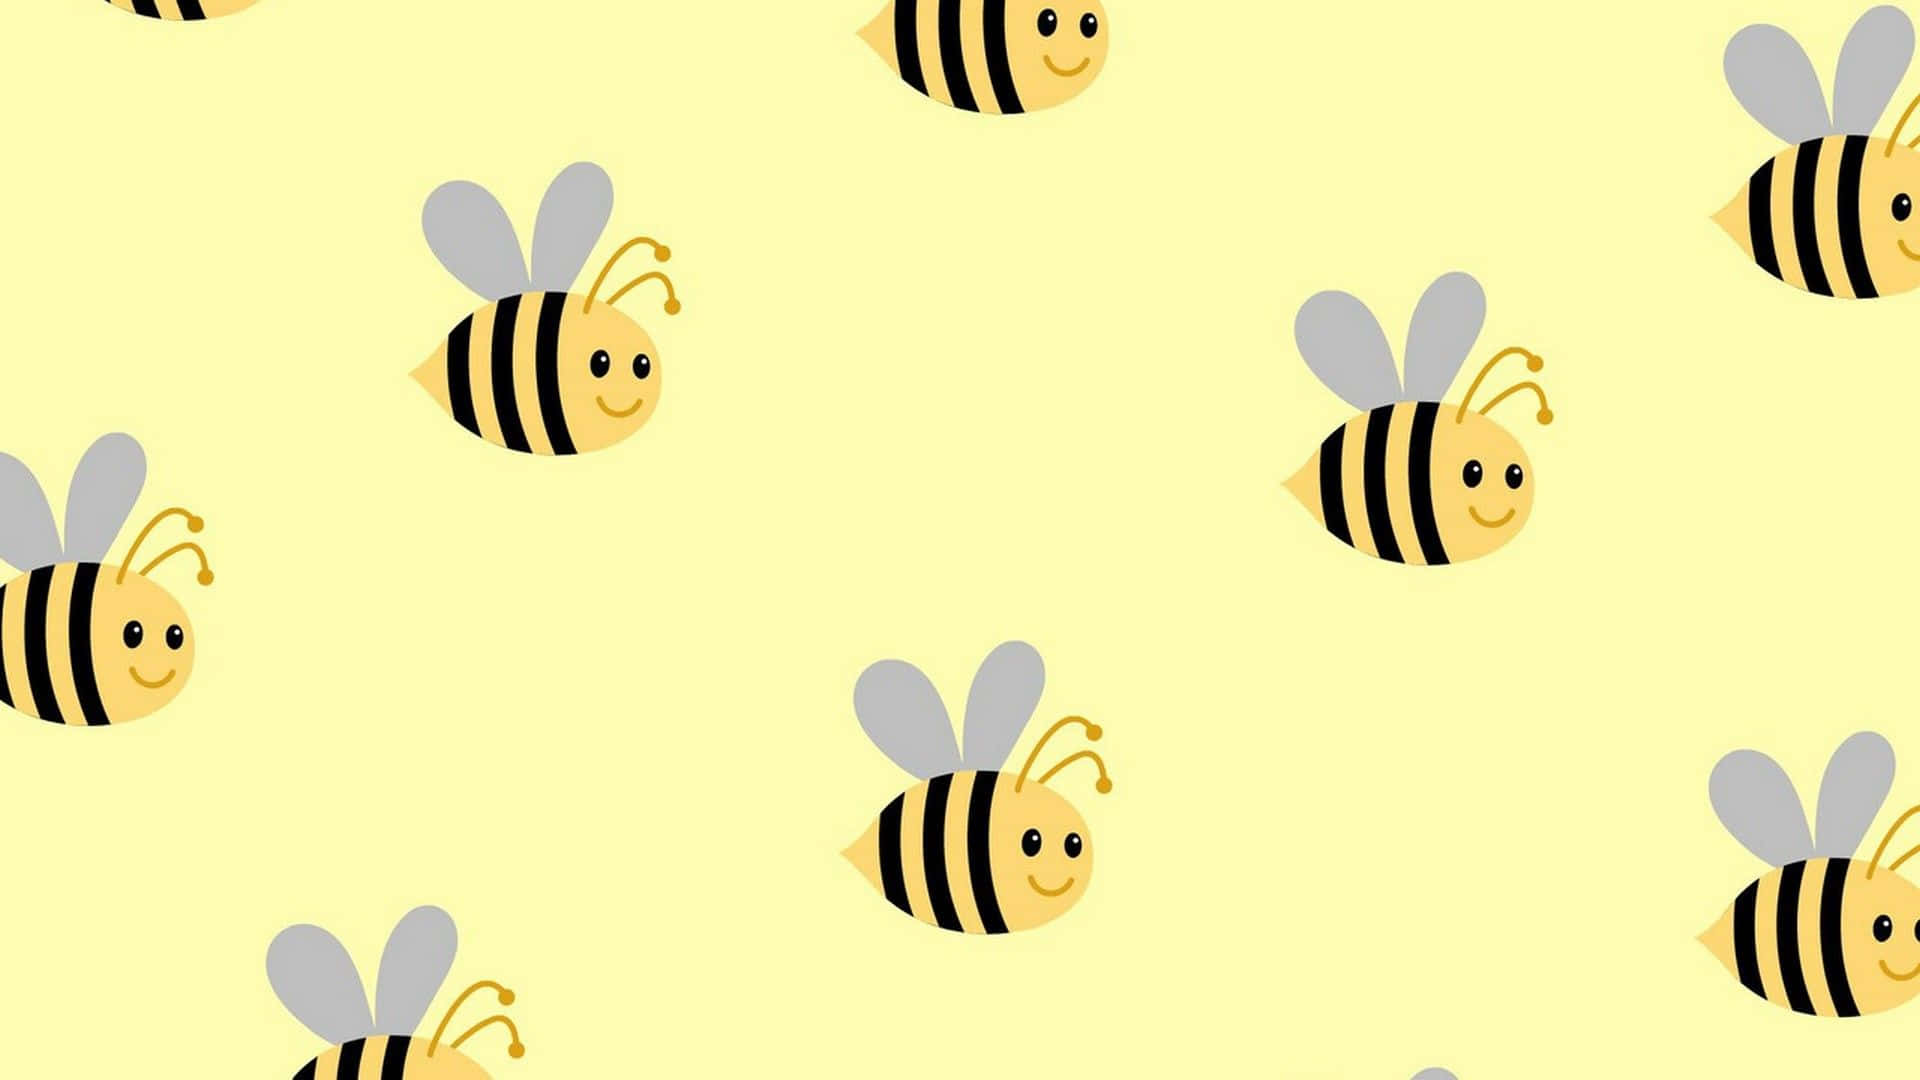 Be cheerful every day with this Cute Yellow Desktop Wallpaper